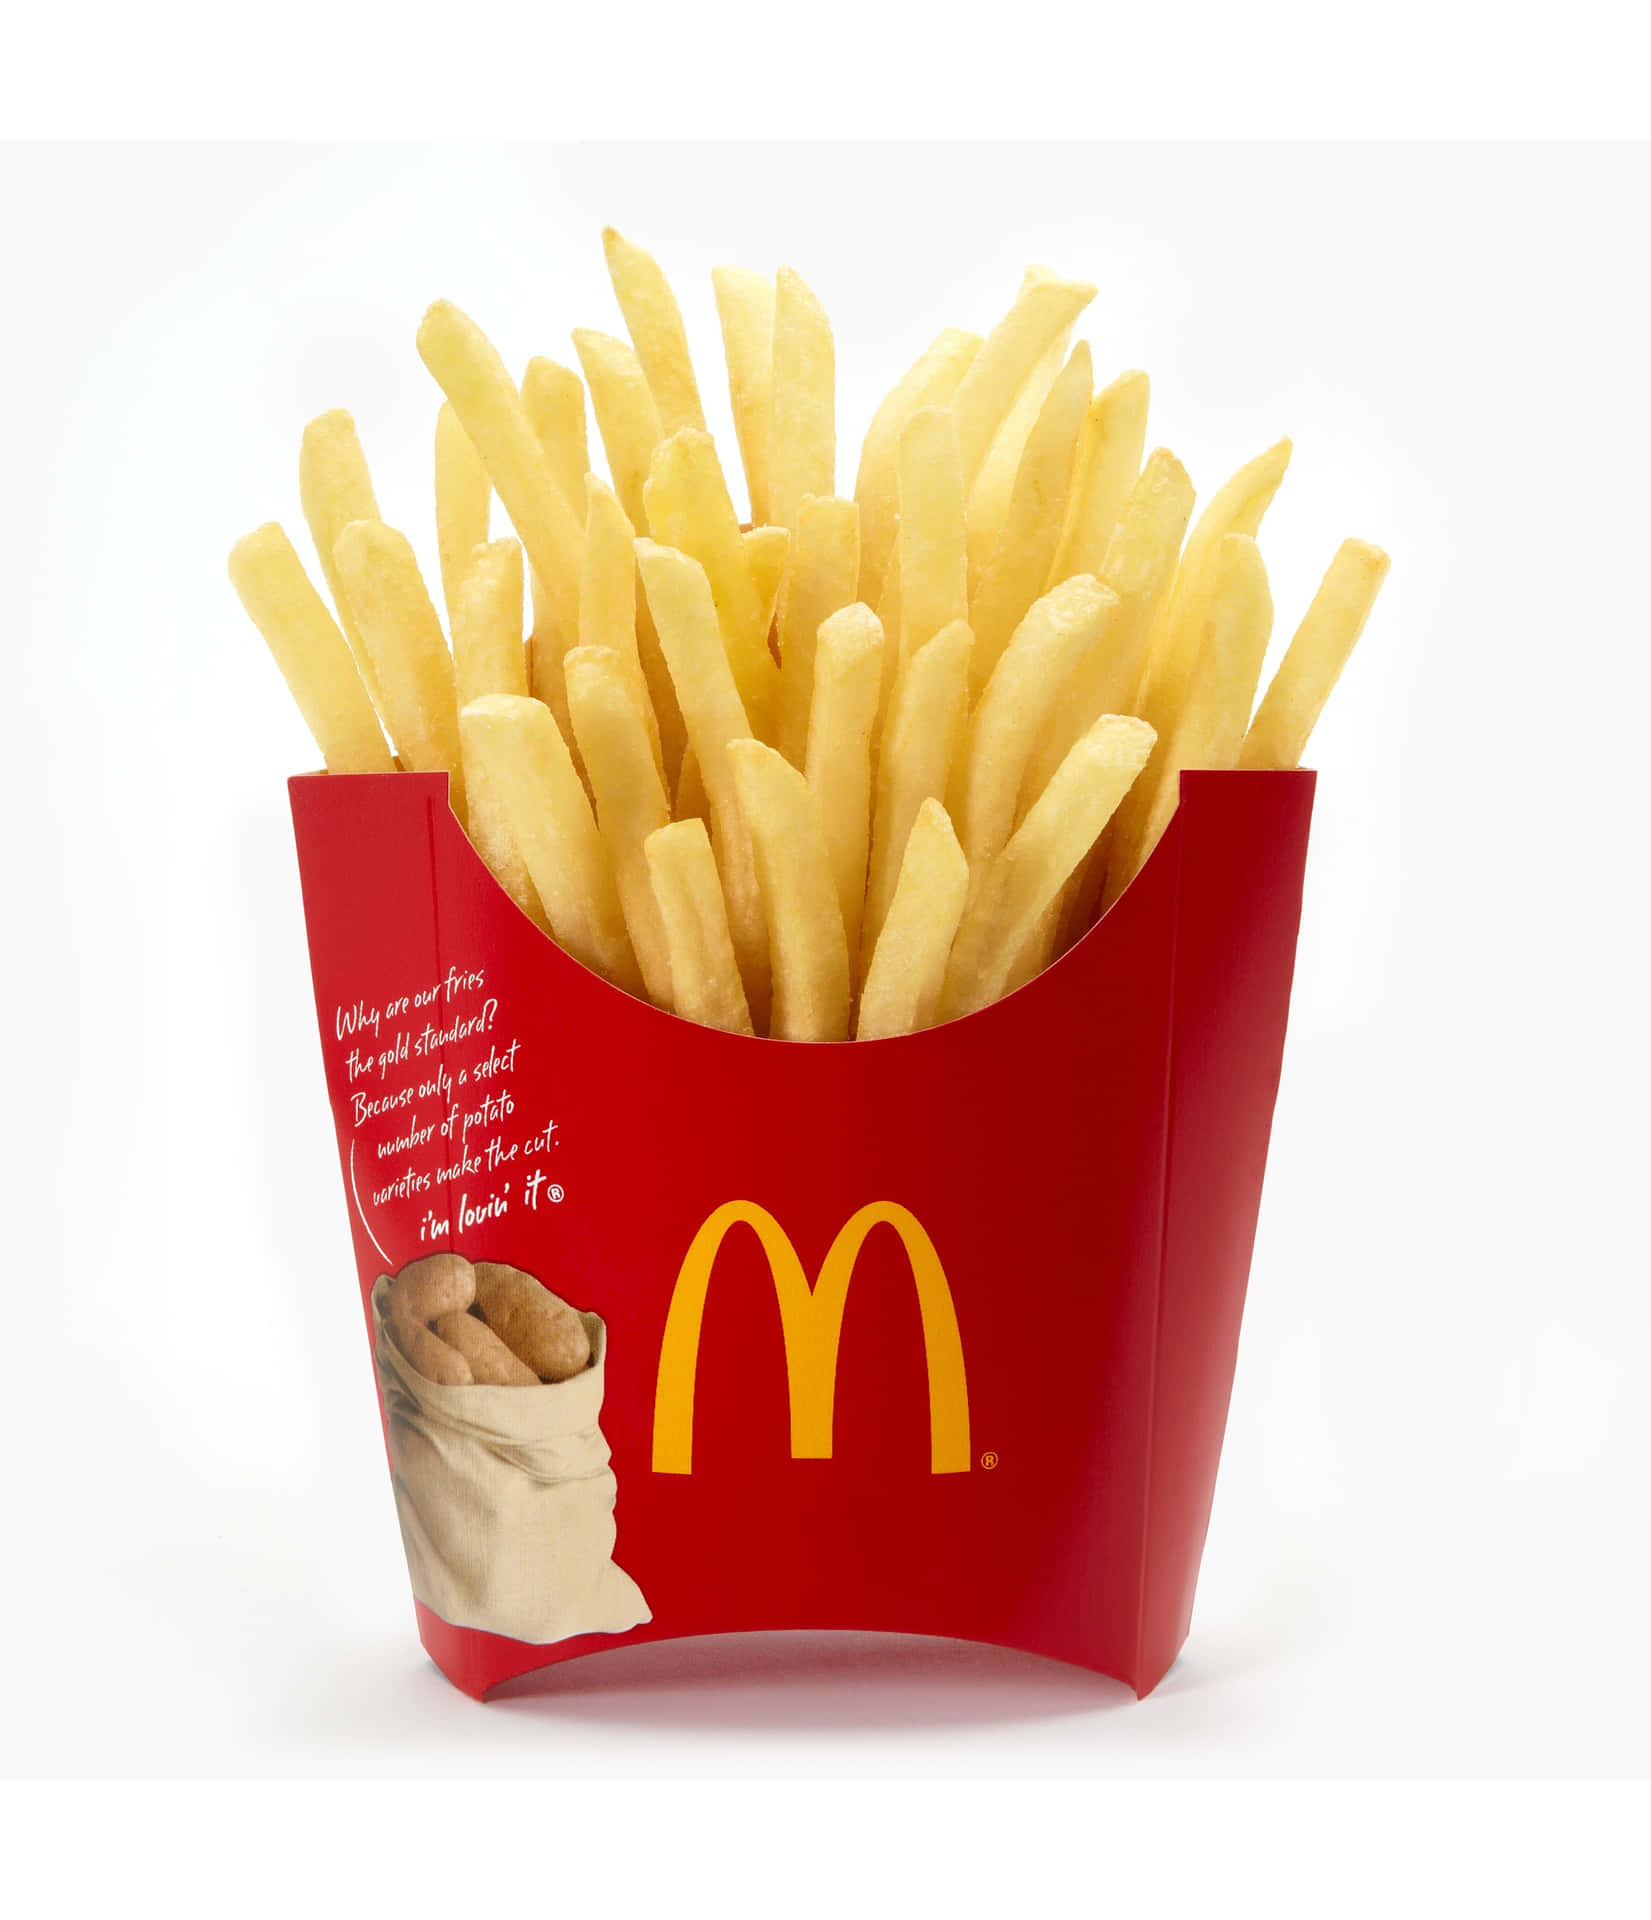 Enjoy Delicious Hand-Cut French Fries!